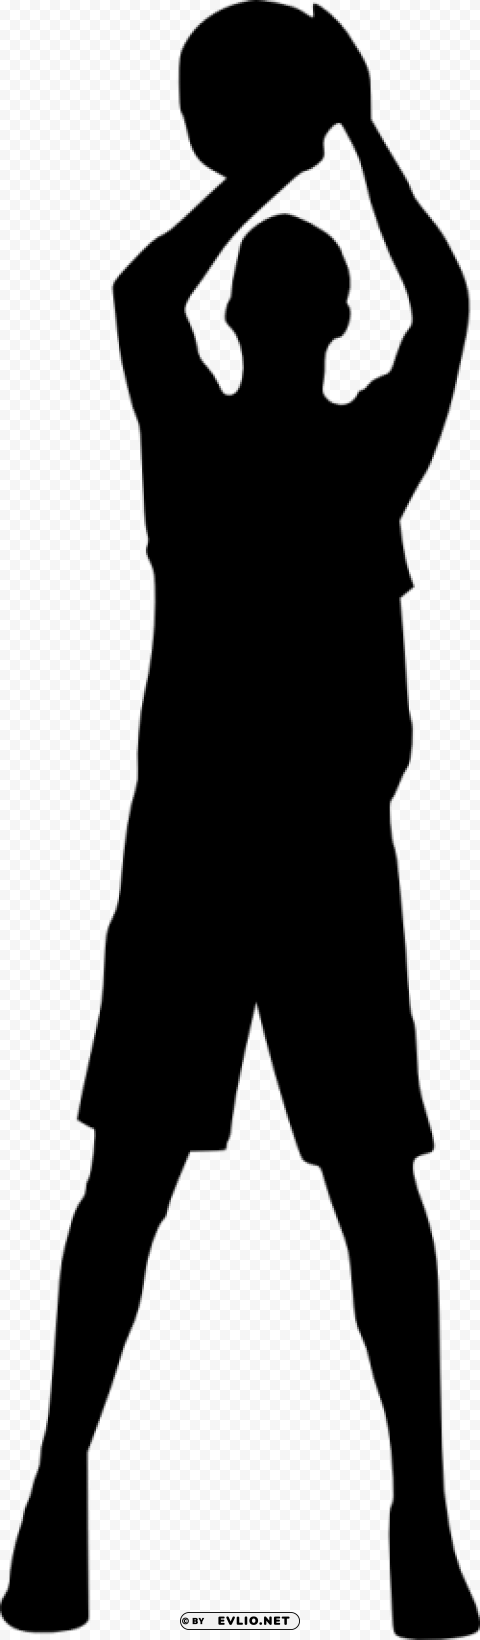 basketball player silhouette Transparent PNG picture